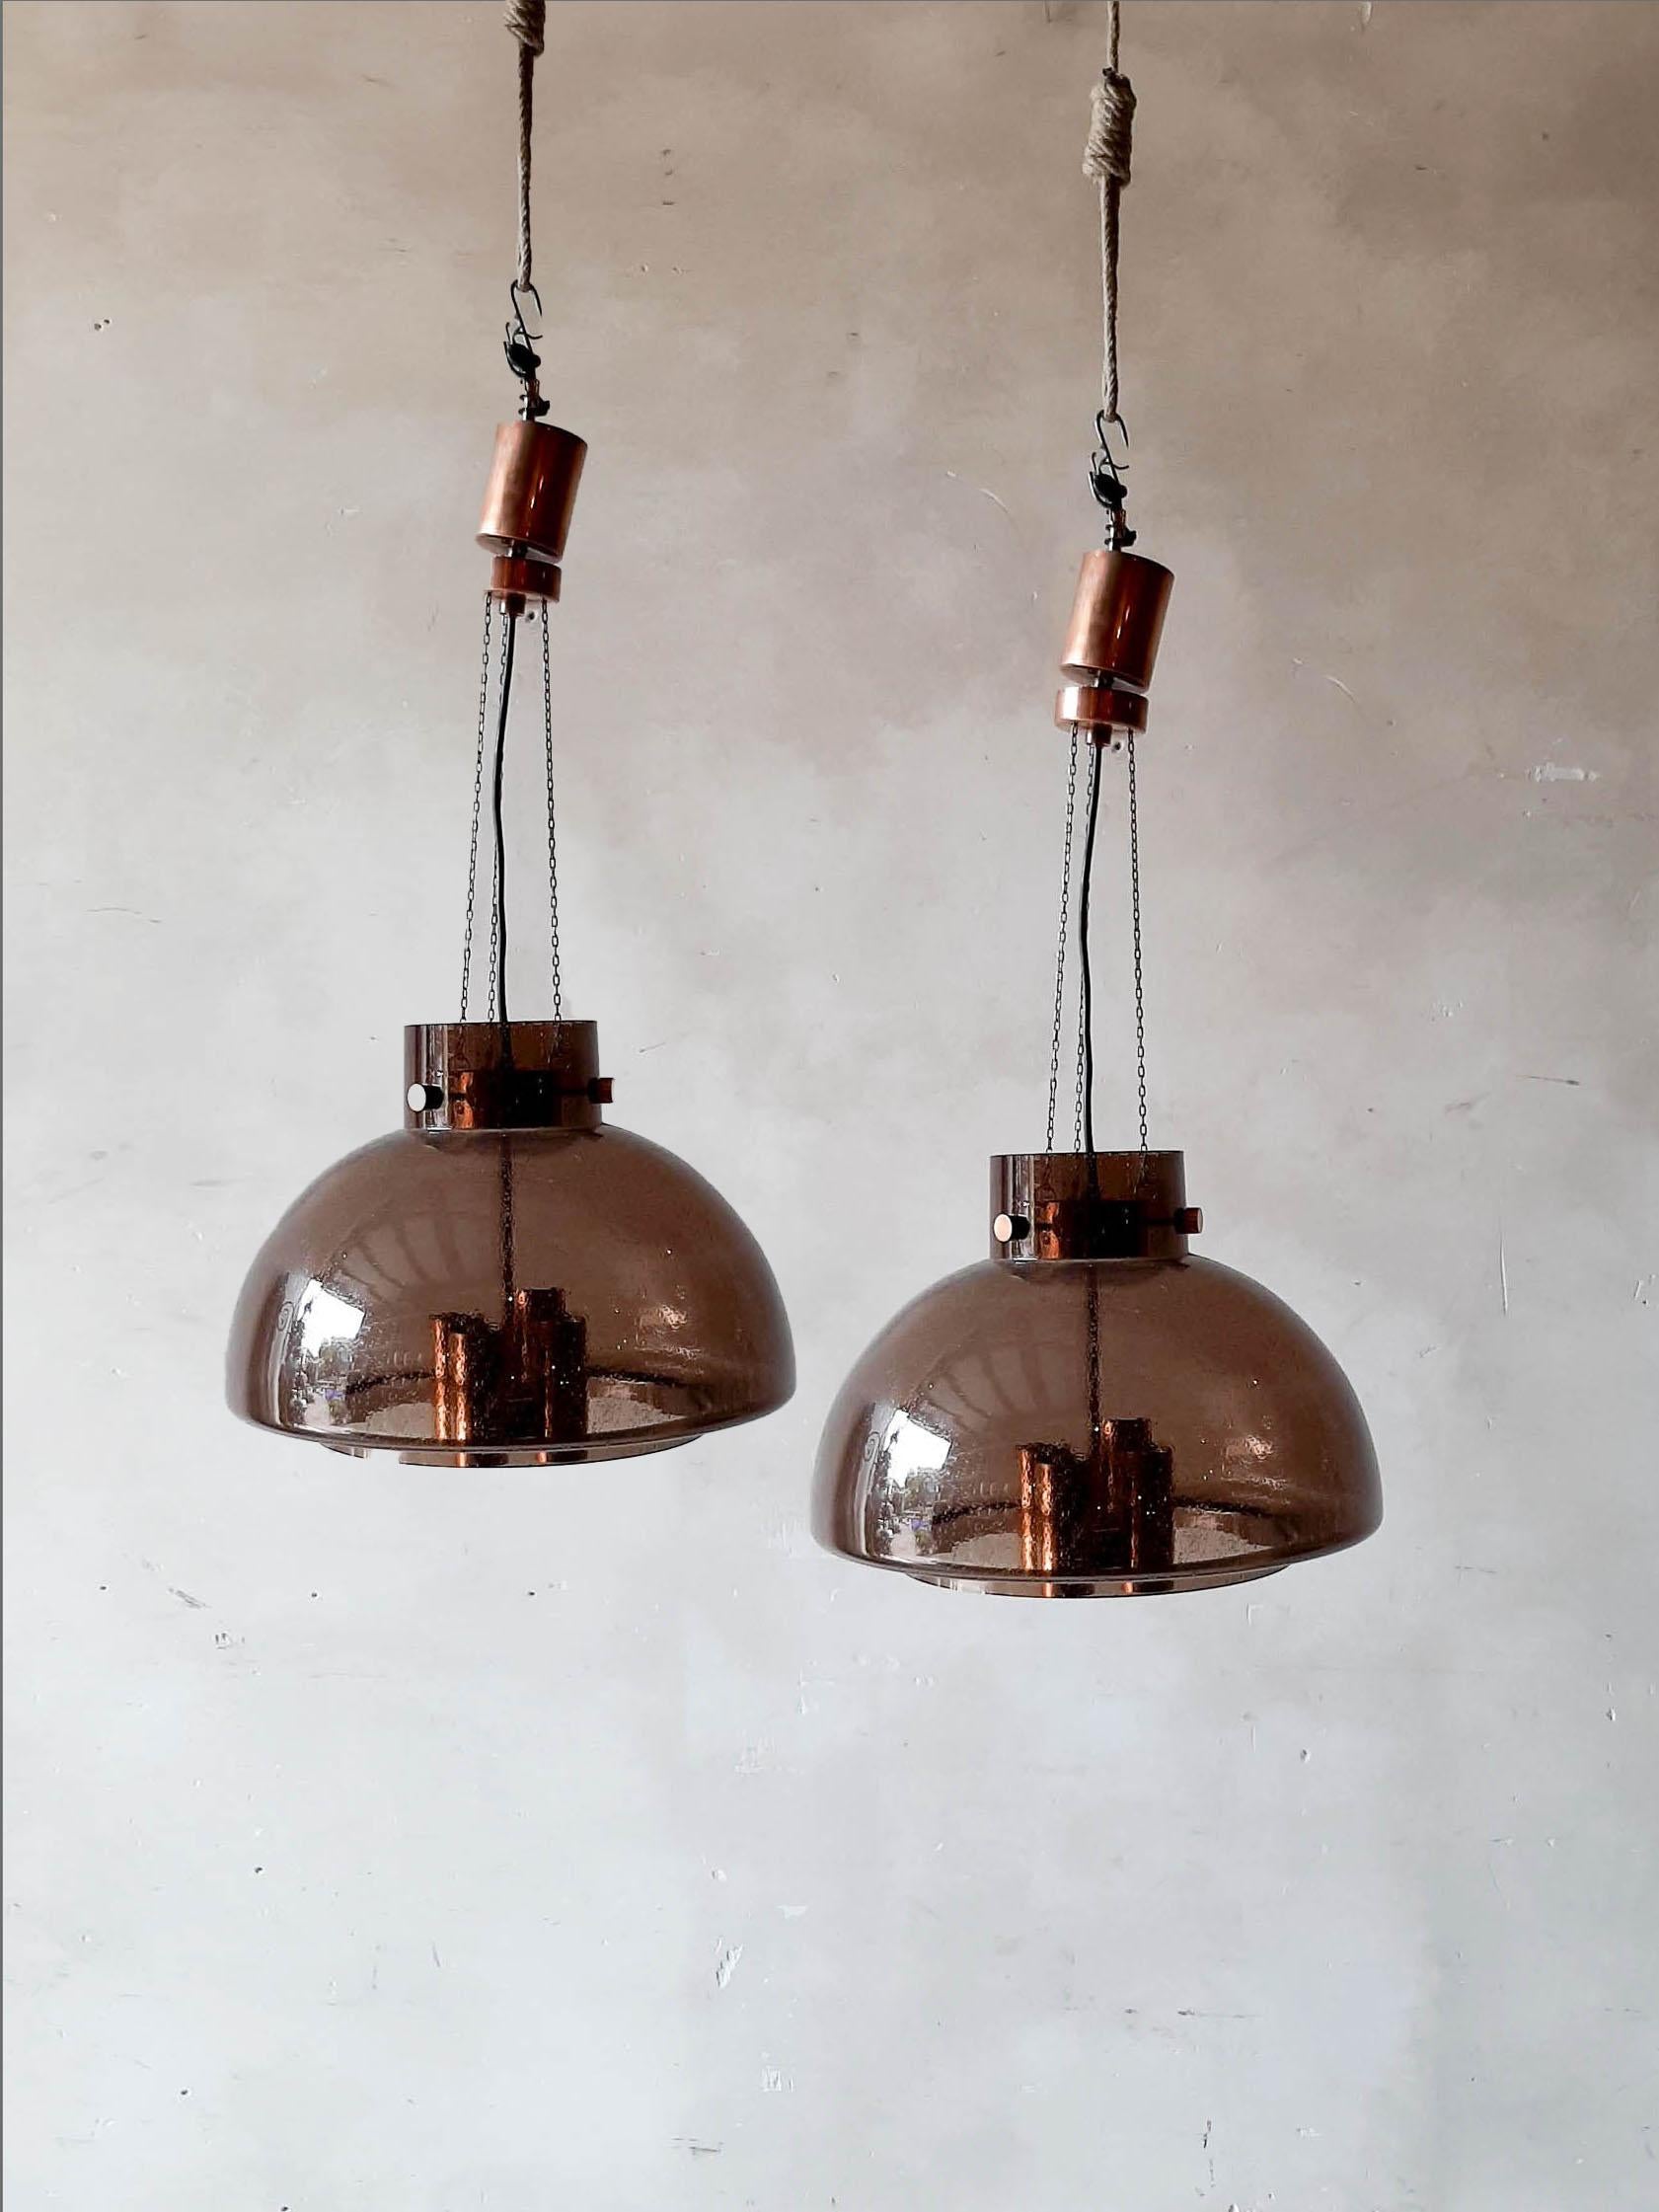 Pair of vintage brown glass pendant lamps from Glashütte Limburg by Herbert Proft, Germany 1970-79.
A pair of hand blown pendant light fixtures, the brown glass has small air bubbles in it, what gives a nice diffuse light effect and a nice pattern